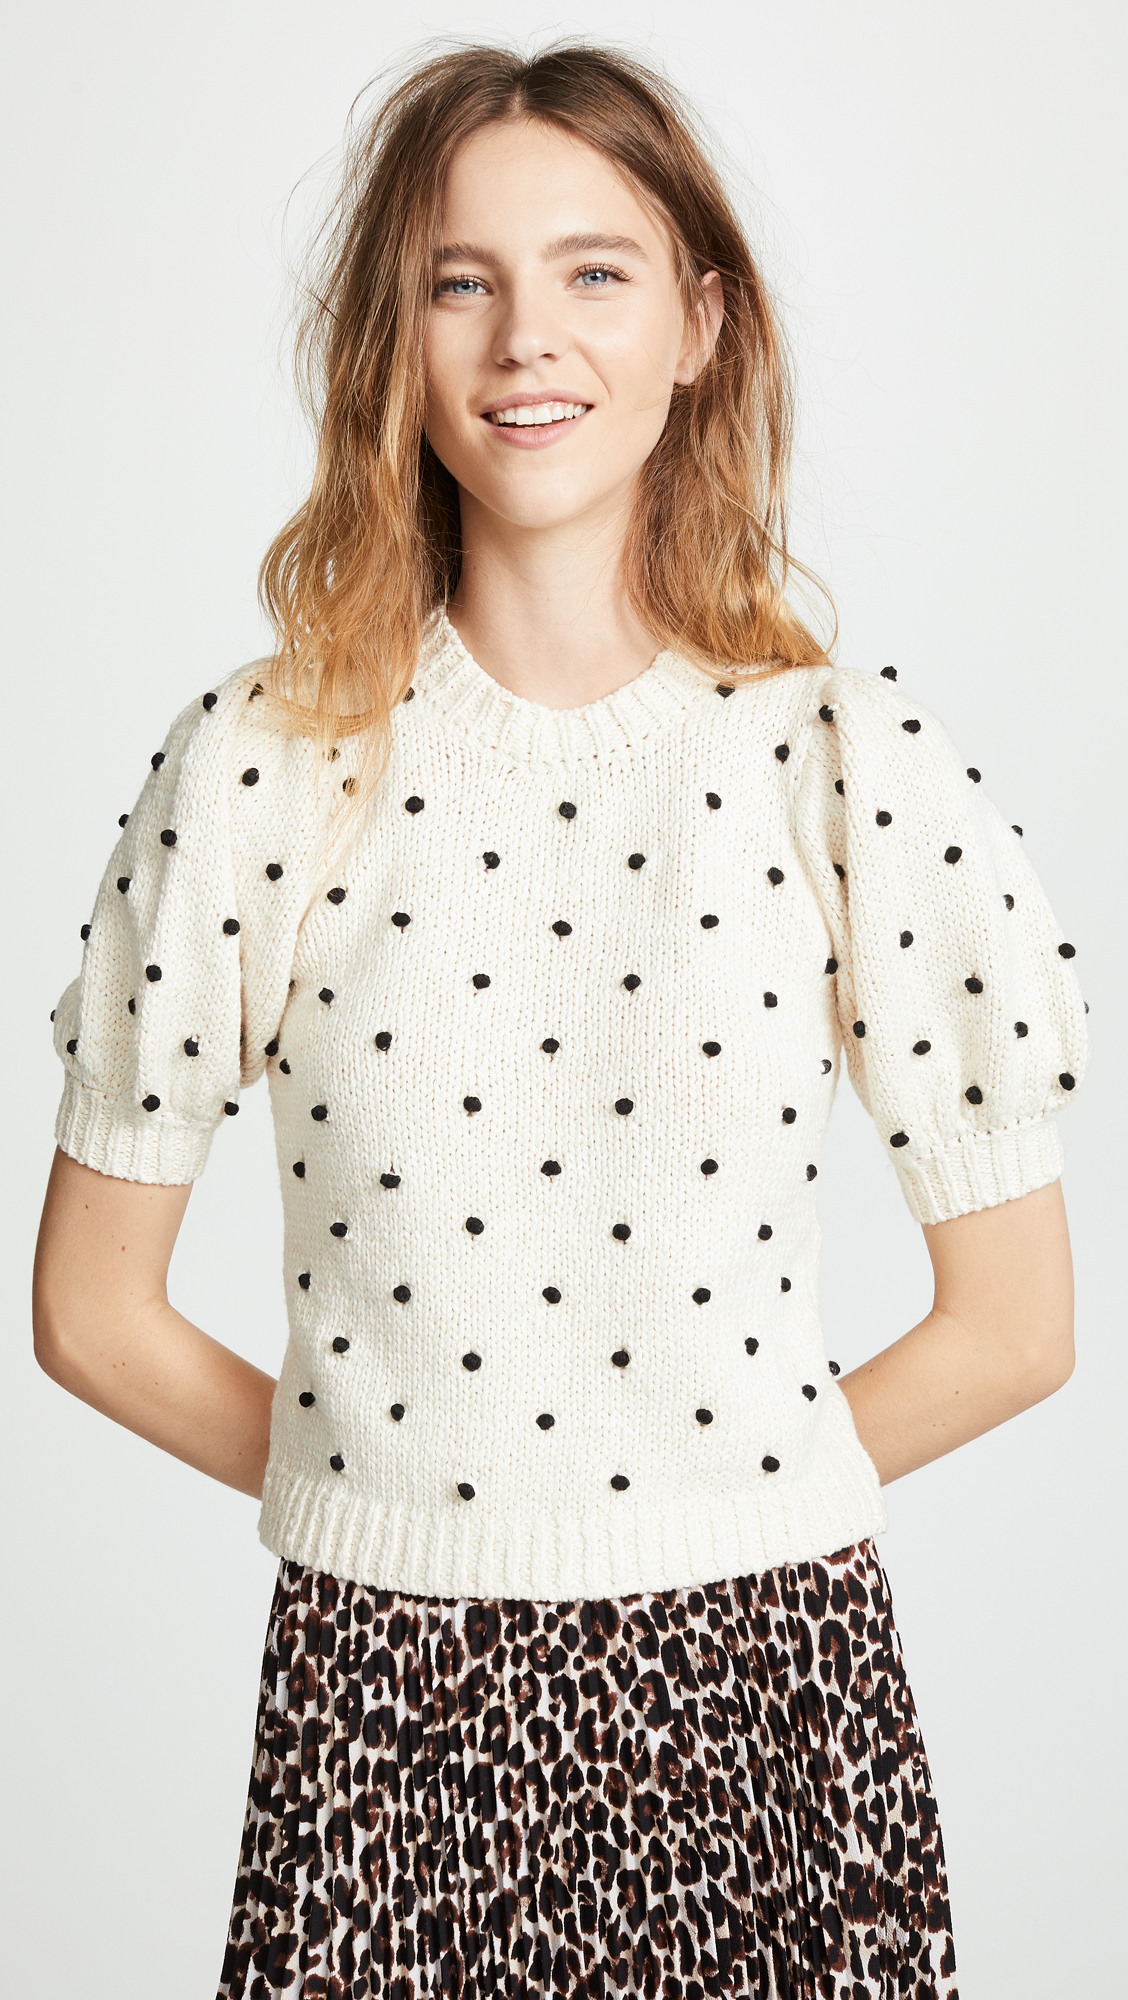 Polka Dot Embroidered Short Sleeve Sweater Black and White